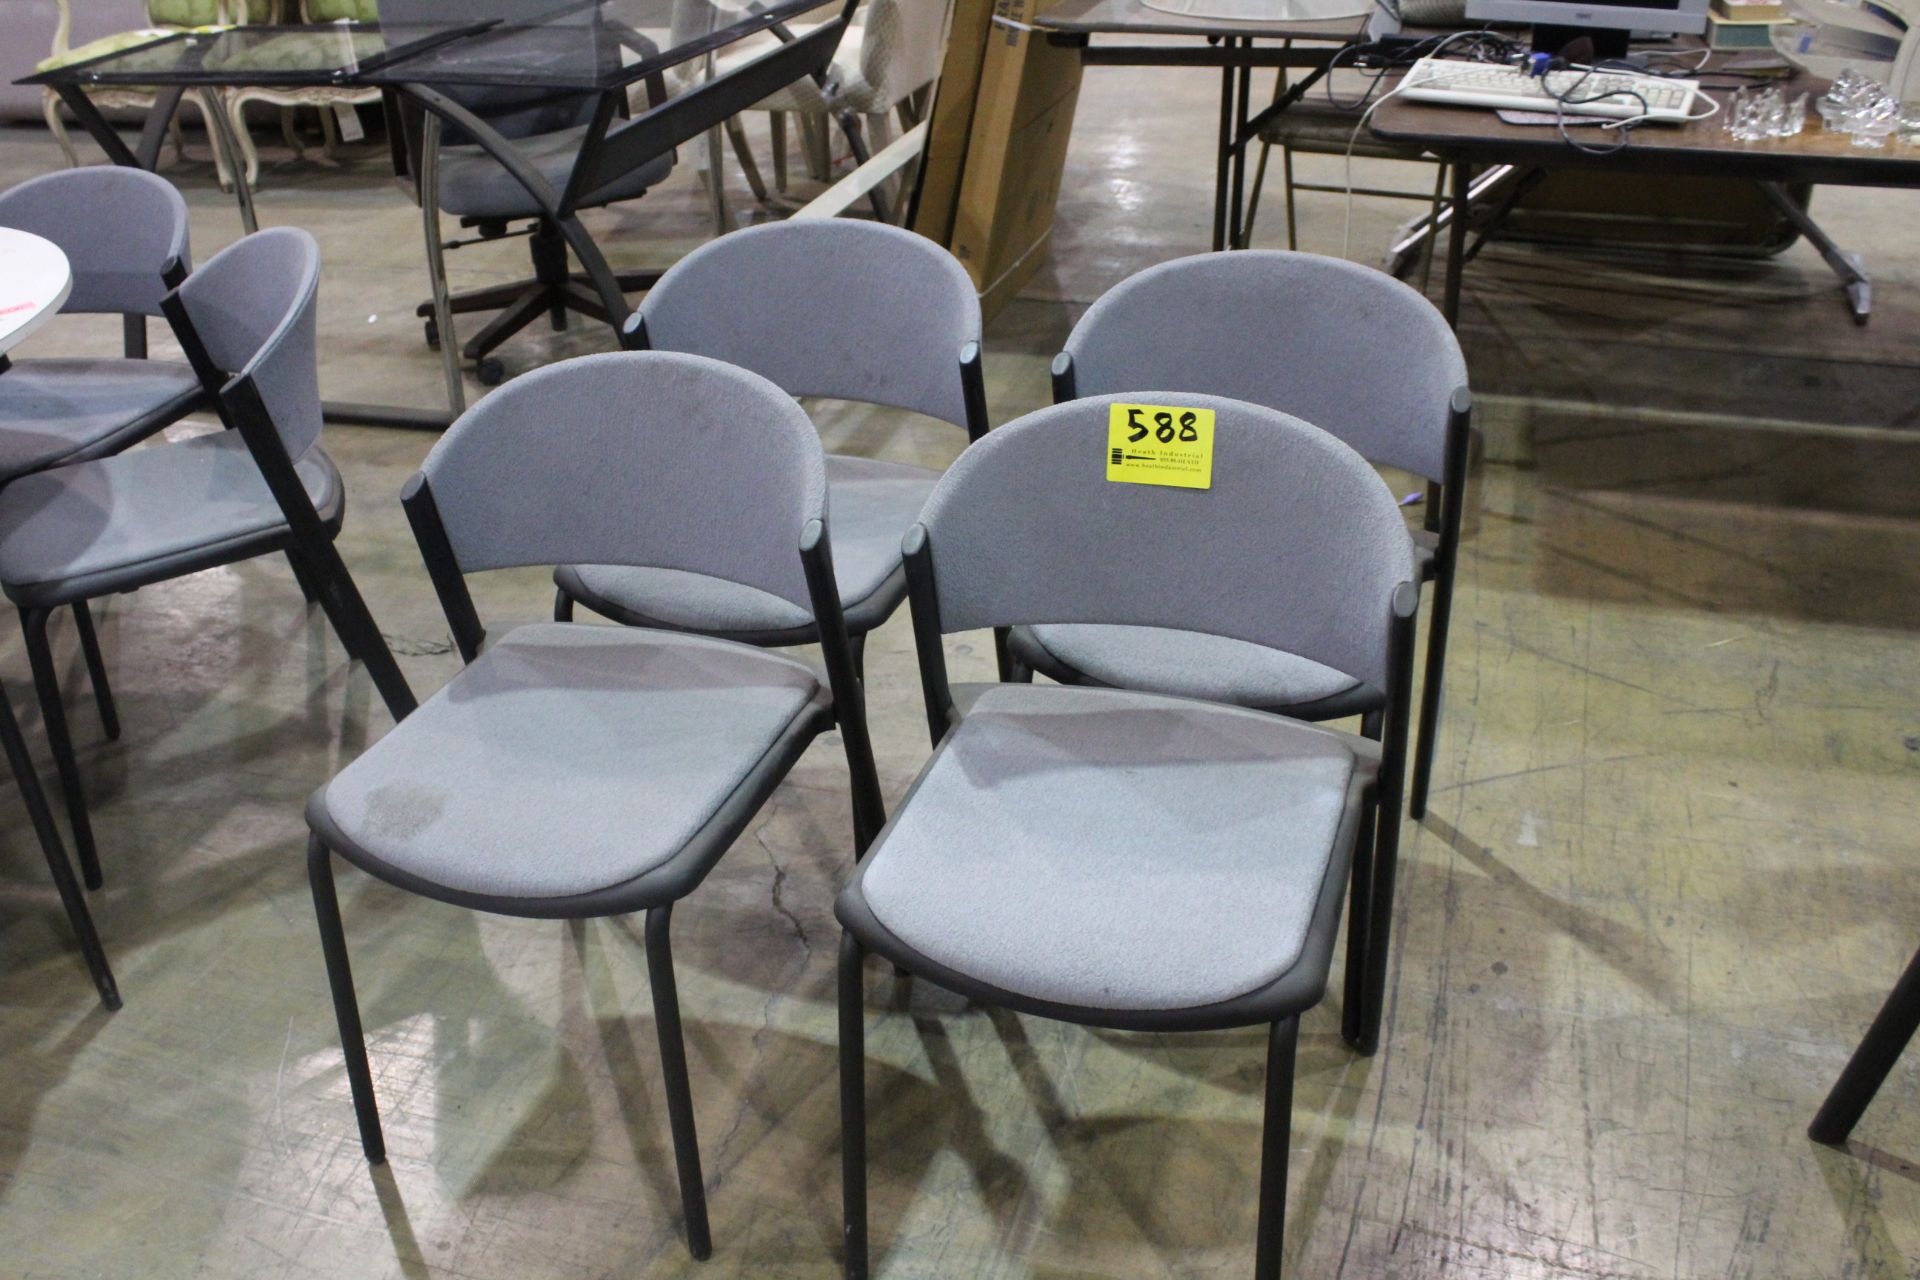 FOUR CLOTH COVERED STACKING CHAIRS